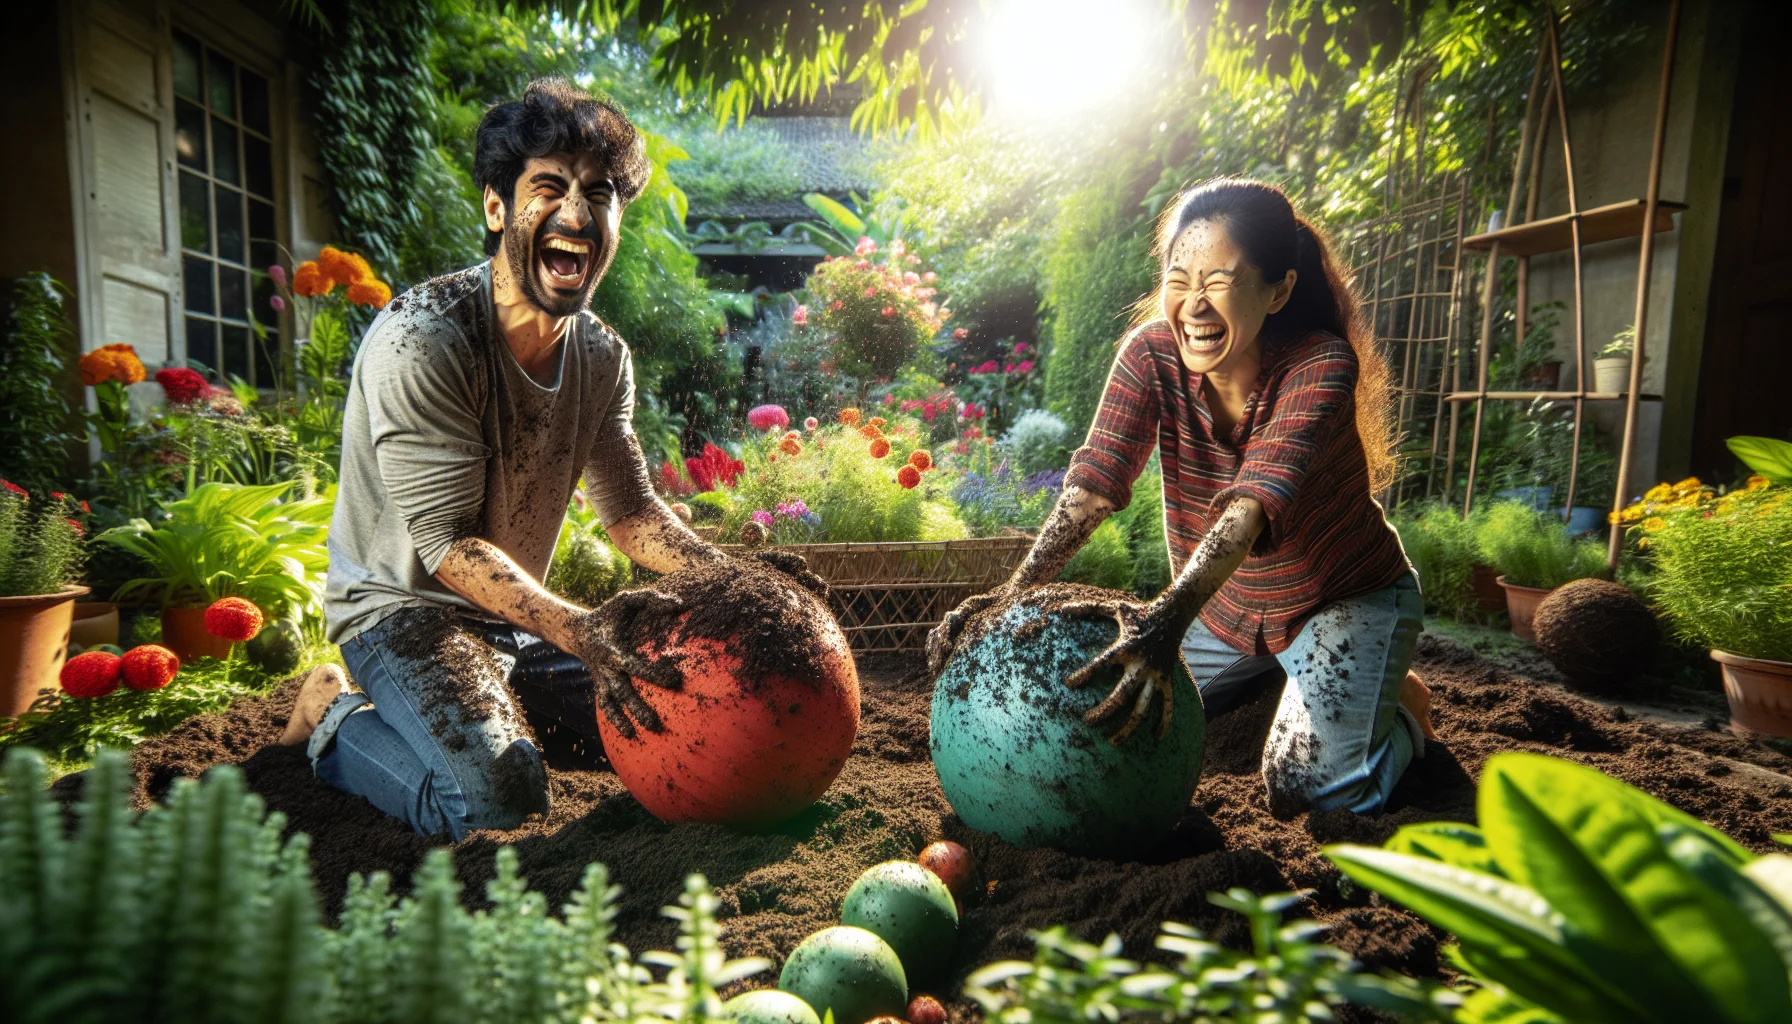 A humorous and engaging scene unfolding in a lush garden. A South Asian man and a Hispanic woman are laughing together as they grapple with the creation of large garden spheres. They're covered in soil and leaves, clearly having a splendid time. Their creations, both intentional and unintentional, are scattered around the garden, some wobbly and misshapen, others perfectly round. Sunlight filters through the trees, highlighting the red, blue and green spheres. The garden itself is vibrant and bursting with variety, from colorful flowers to lush green plants, making the scene inviting and nurturing a love for gardening.